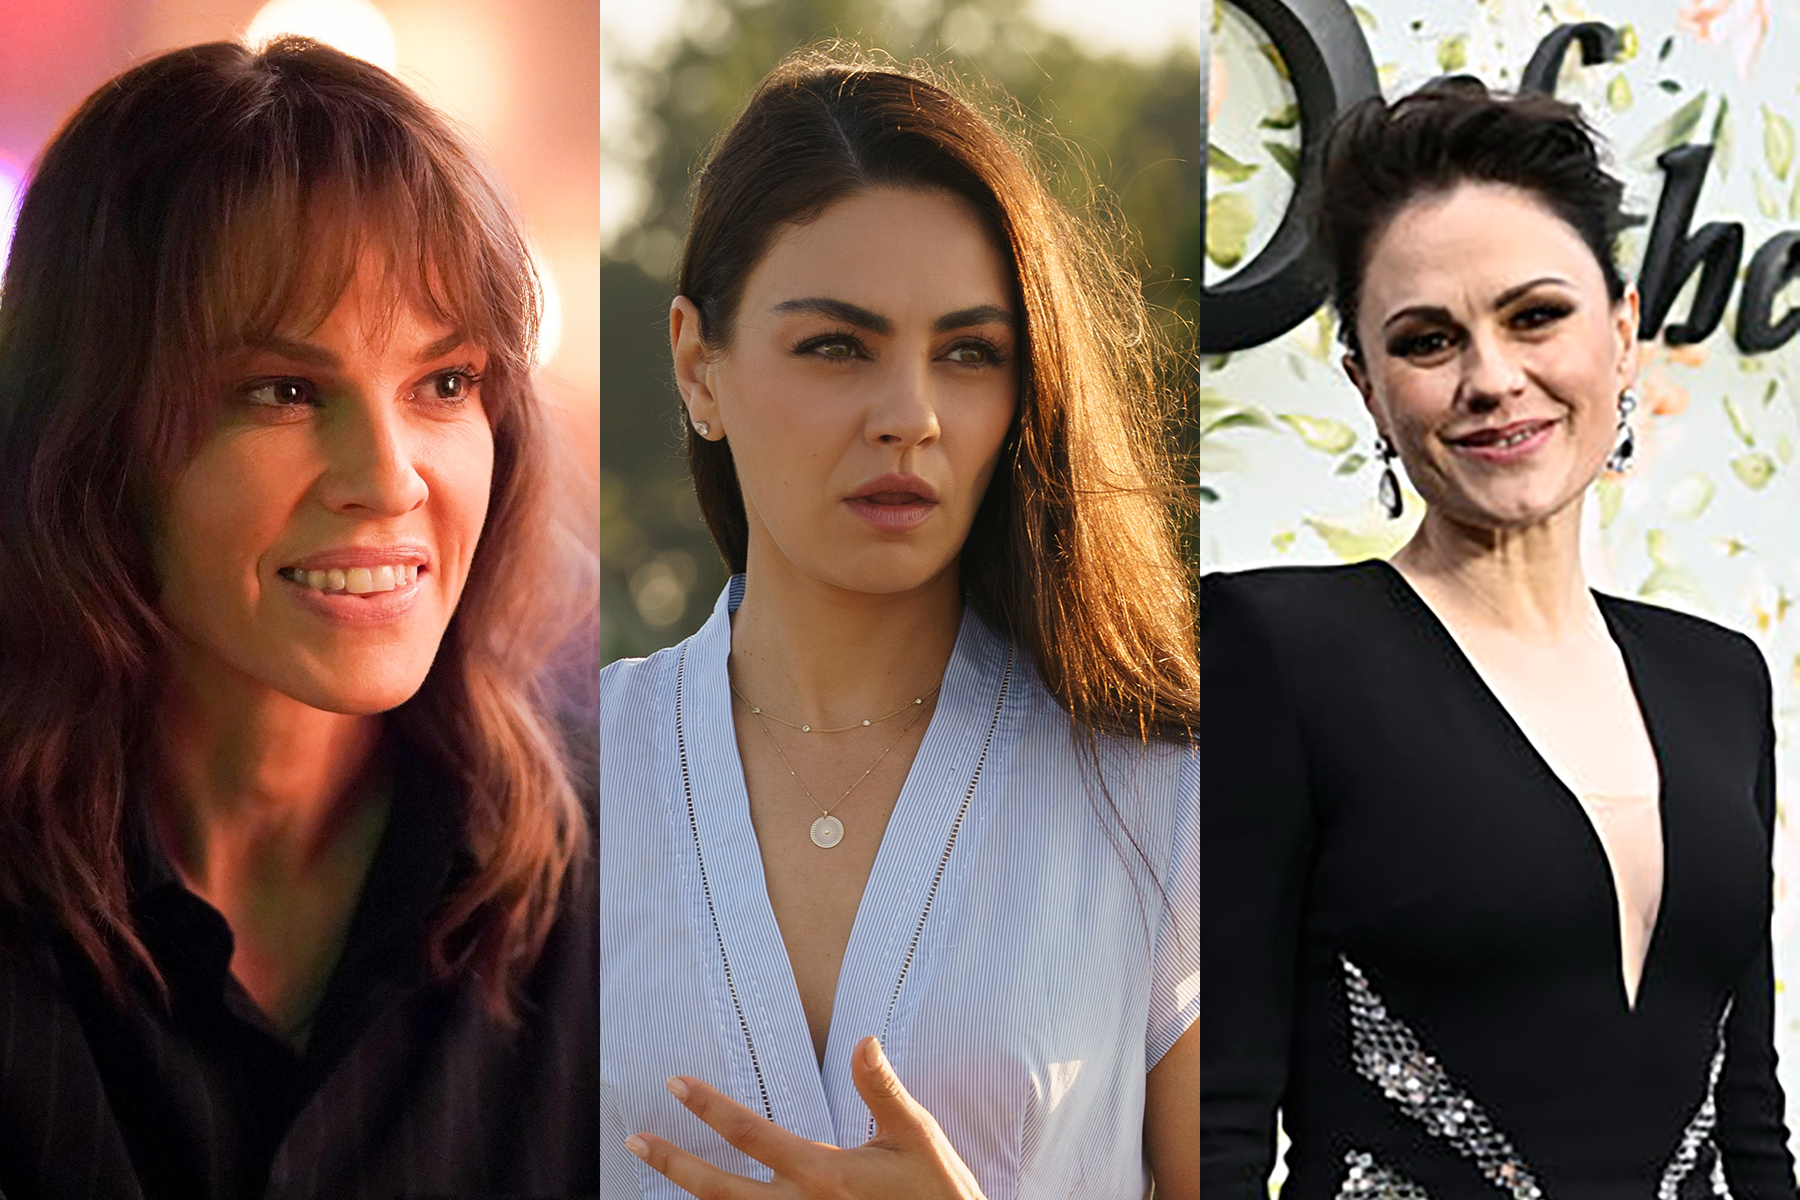 Six Voies 2018 Download - TV best bets with Hilary Swank, Mila Kunis, Anna Paquin, 'Grey's Anatomy,'  'Young Sheldon'